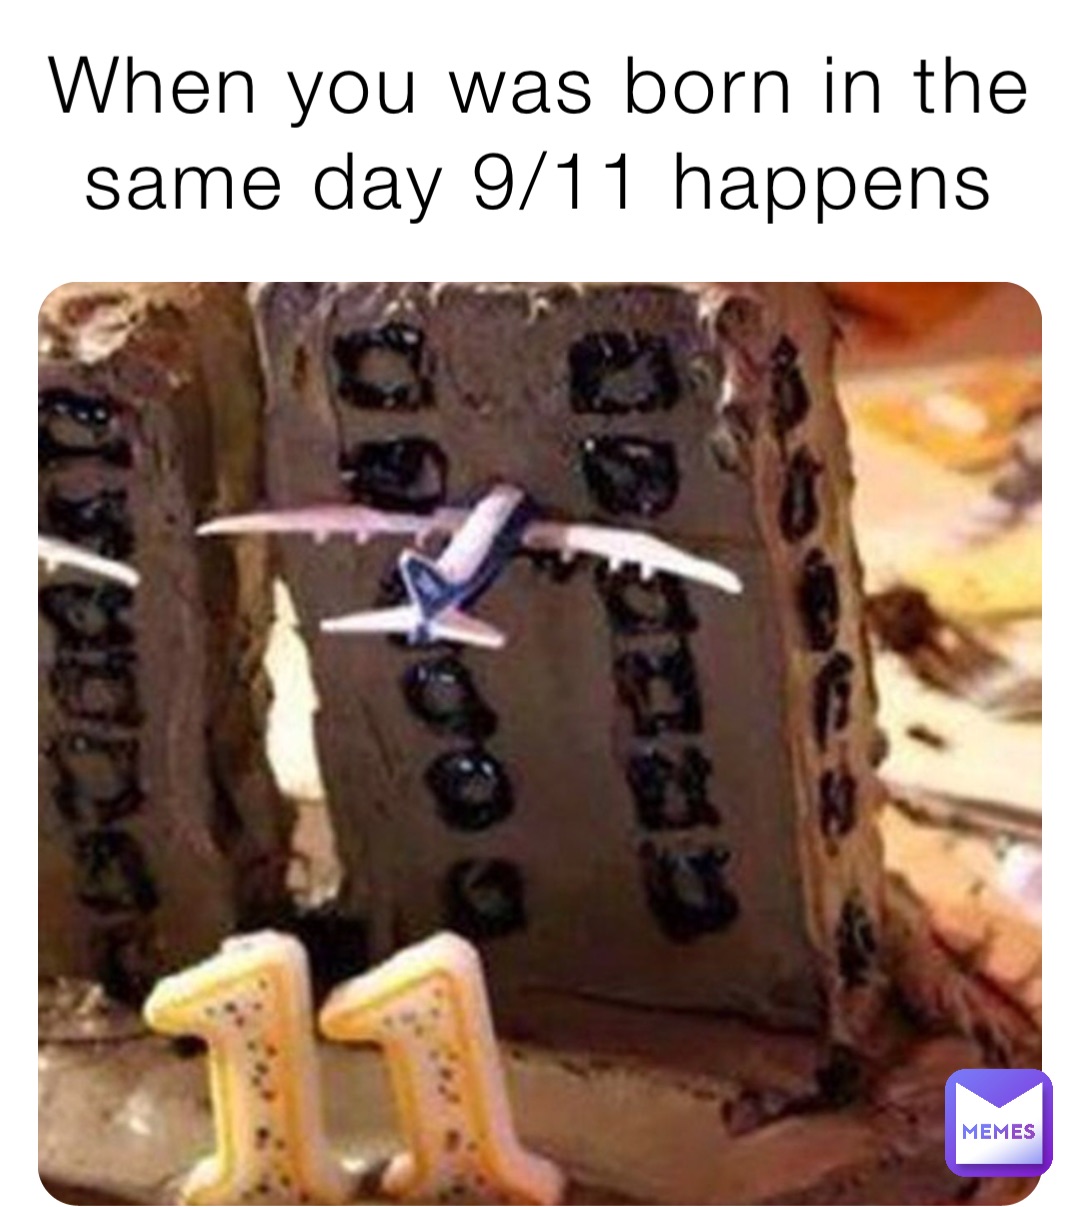 When you was born in the same day 9/11 happens